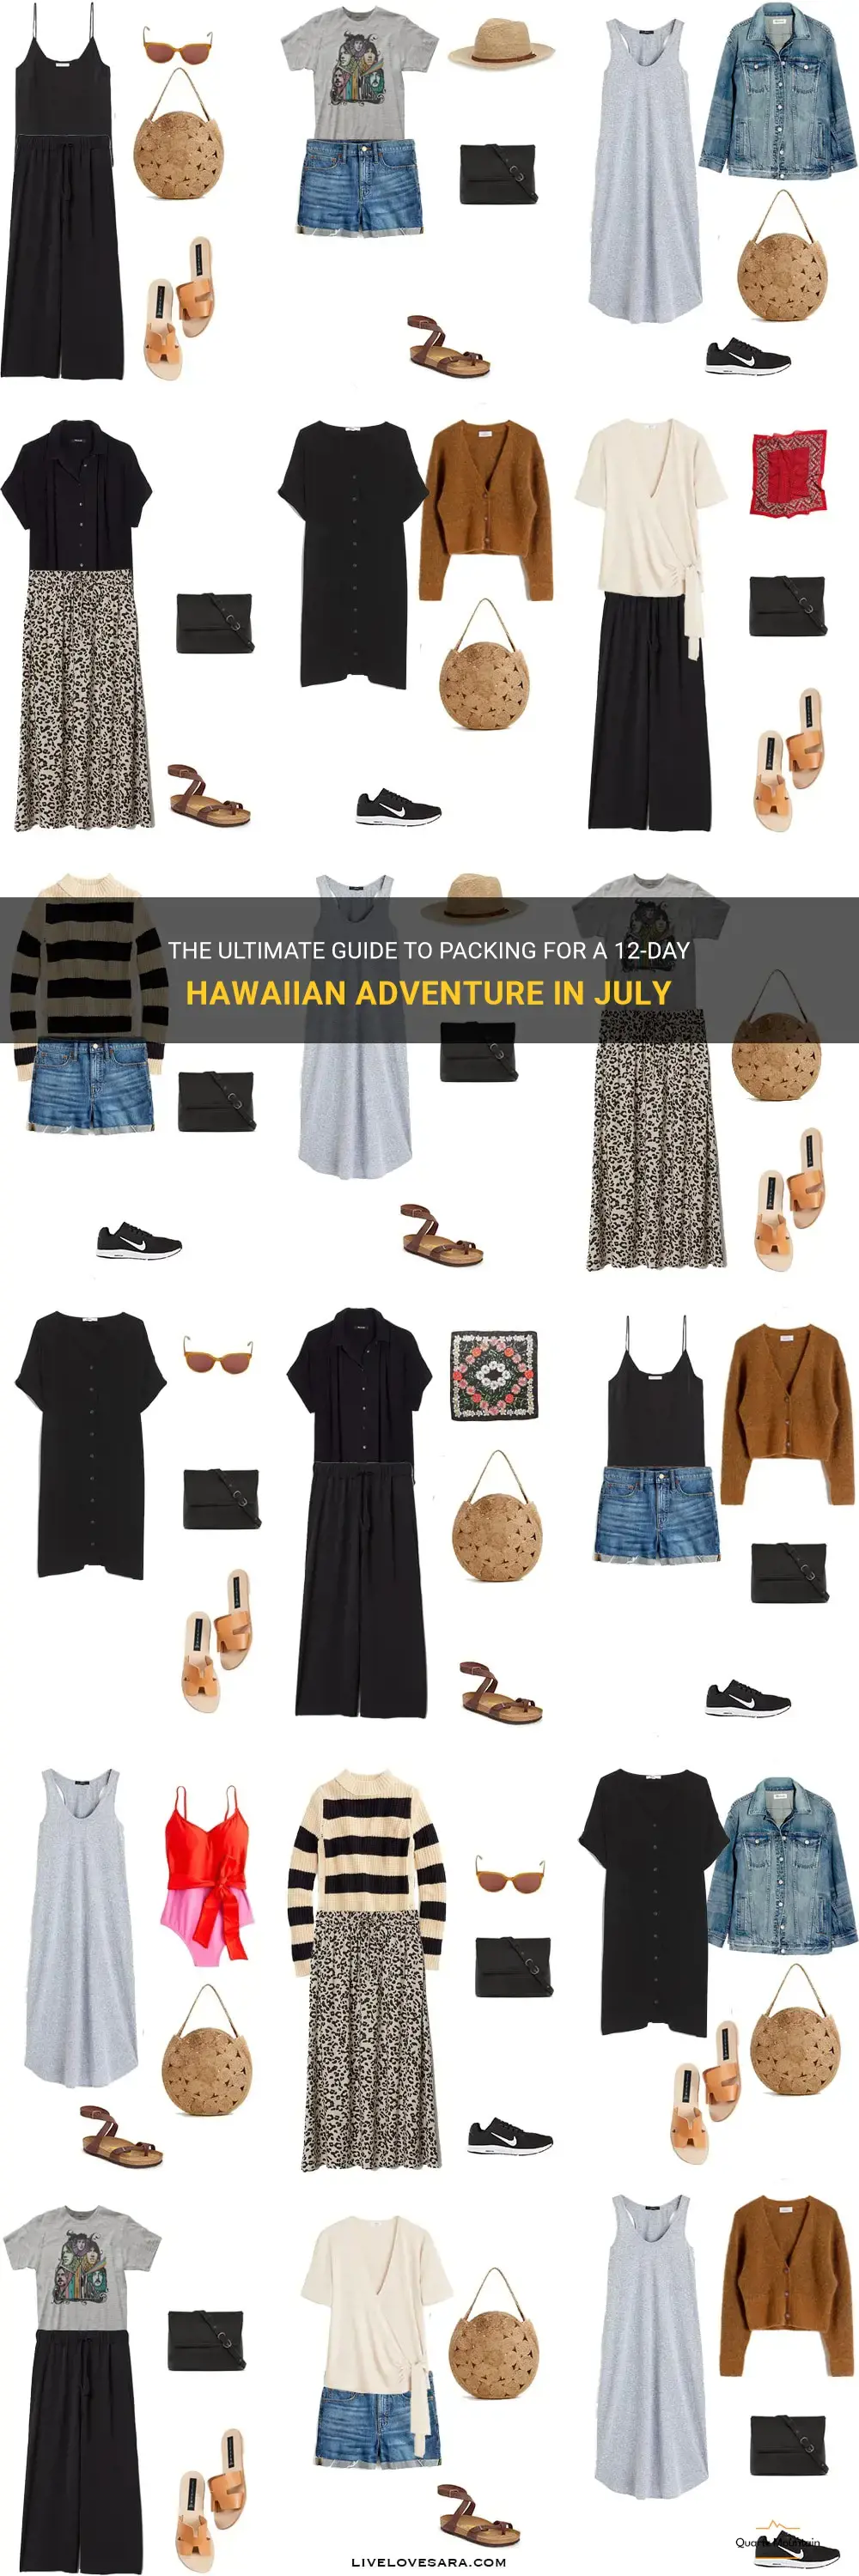 what to pack for 12 days in hawaii in july